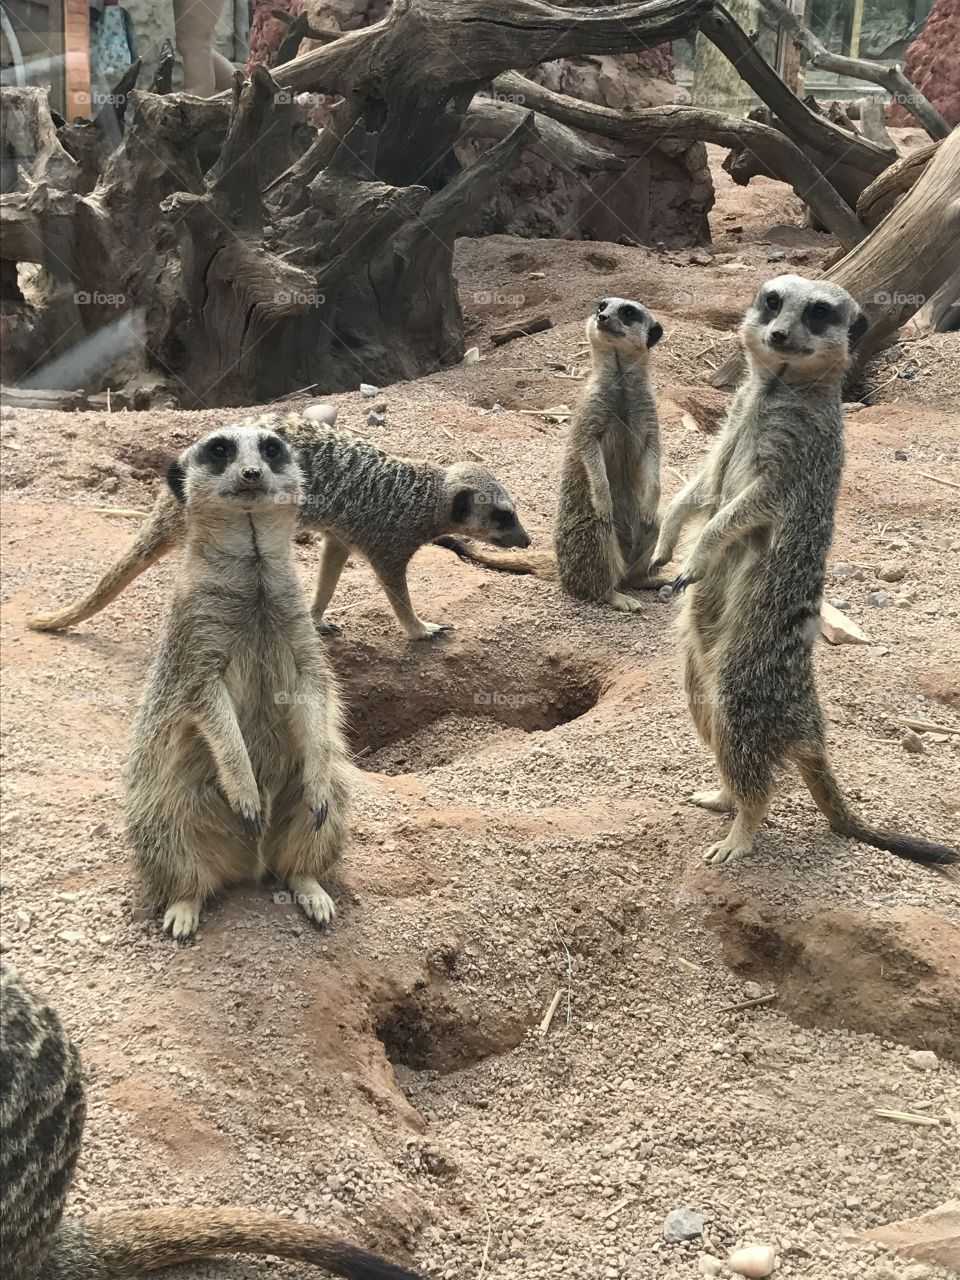 A group of meercat